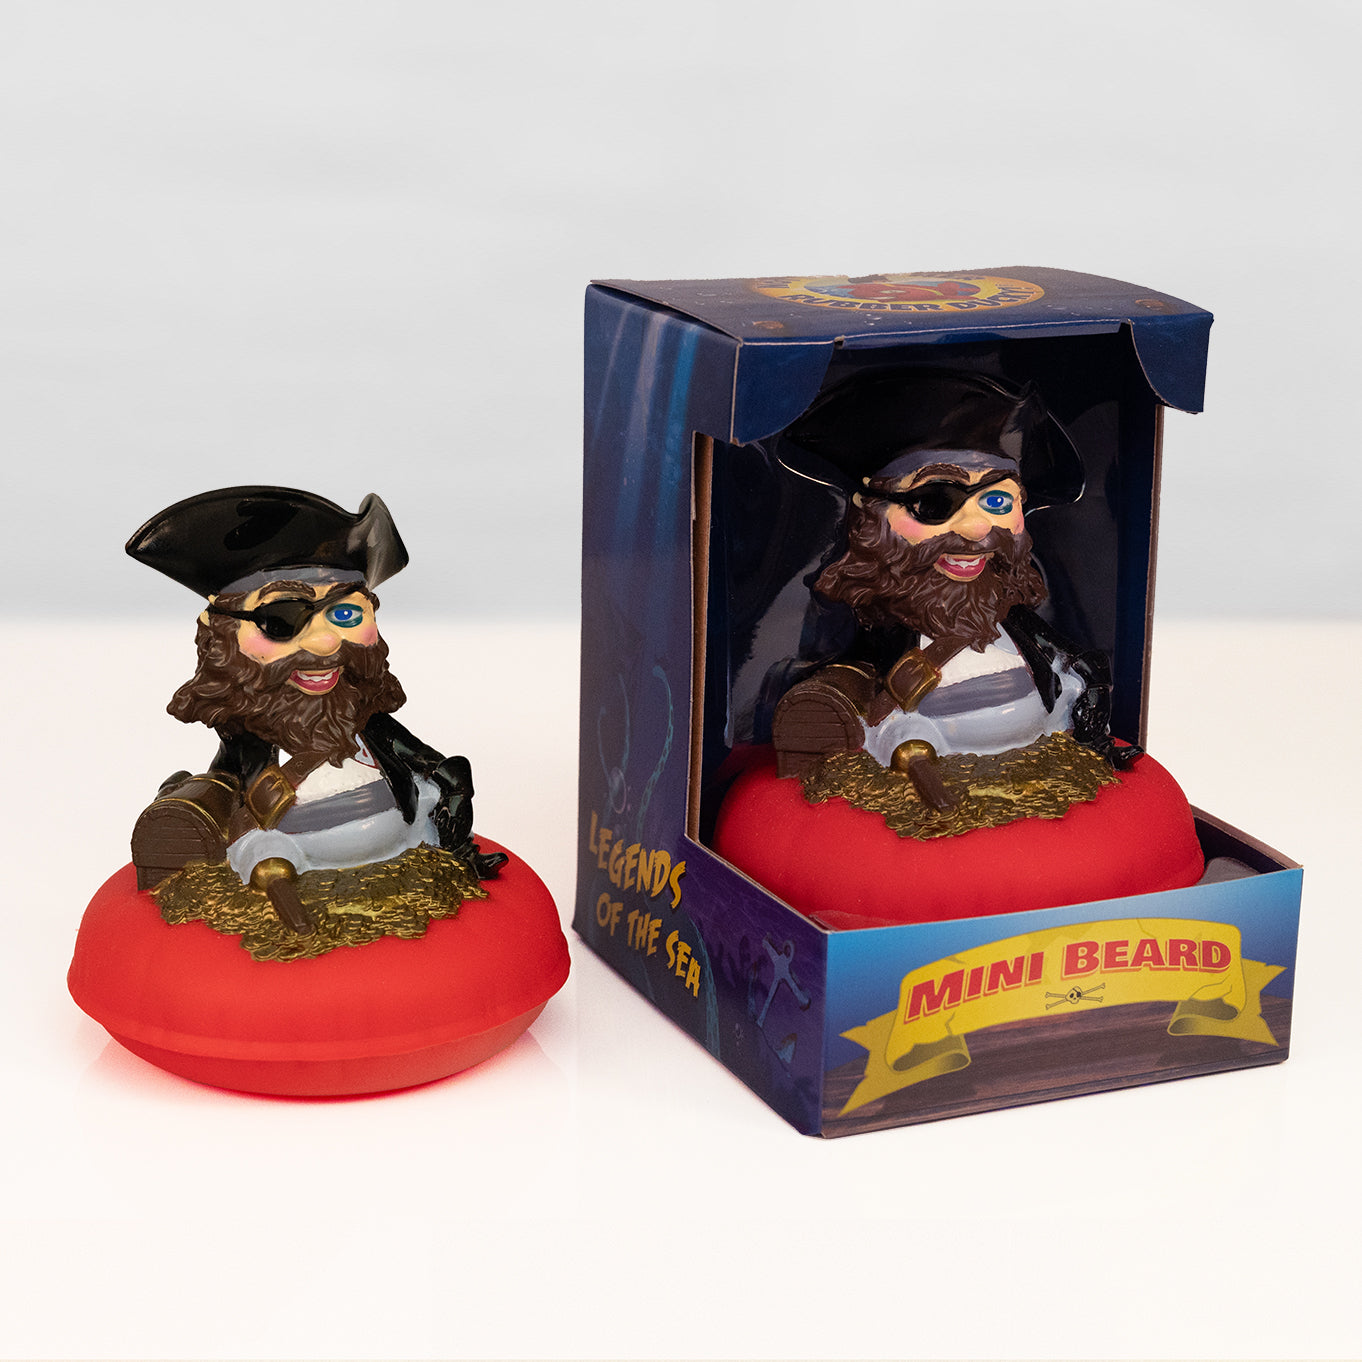 Jolly Pirate Floating Bath Toy